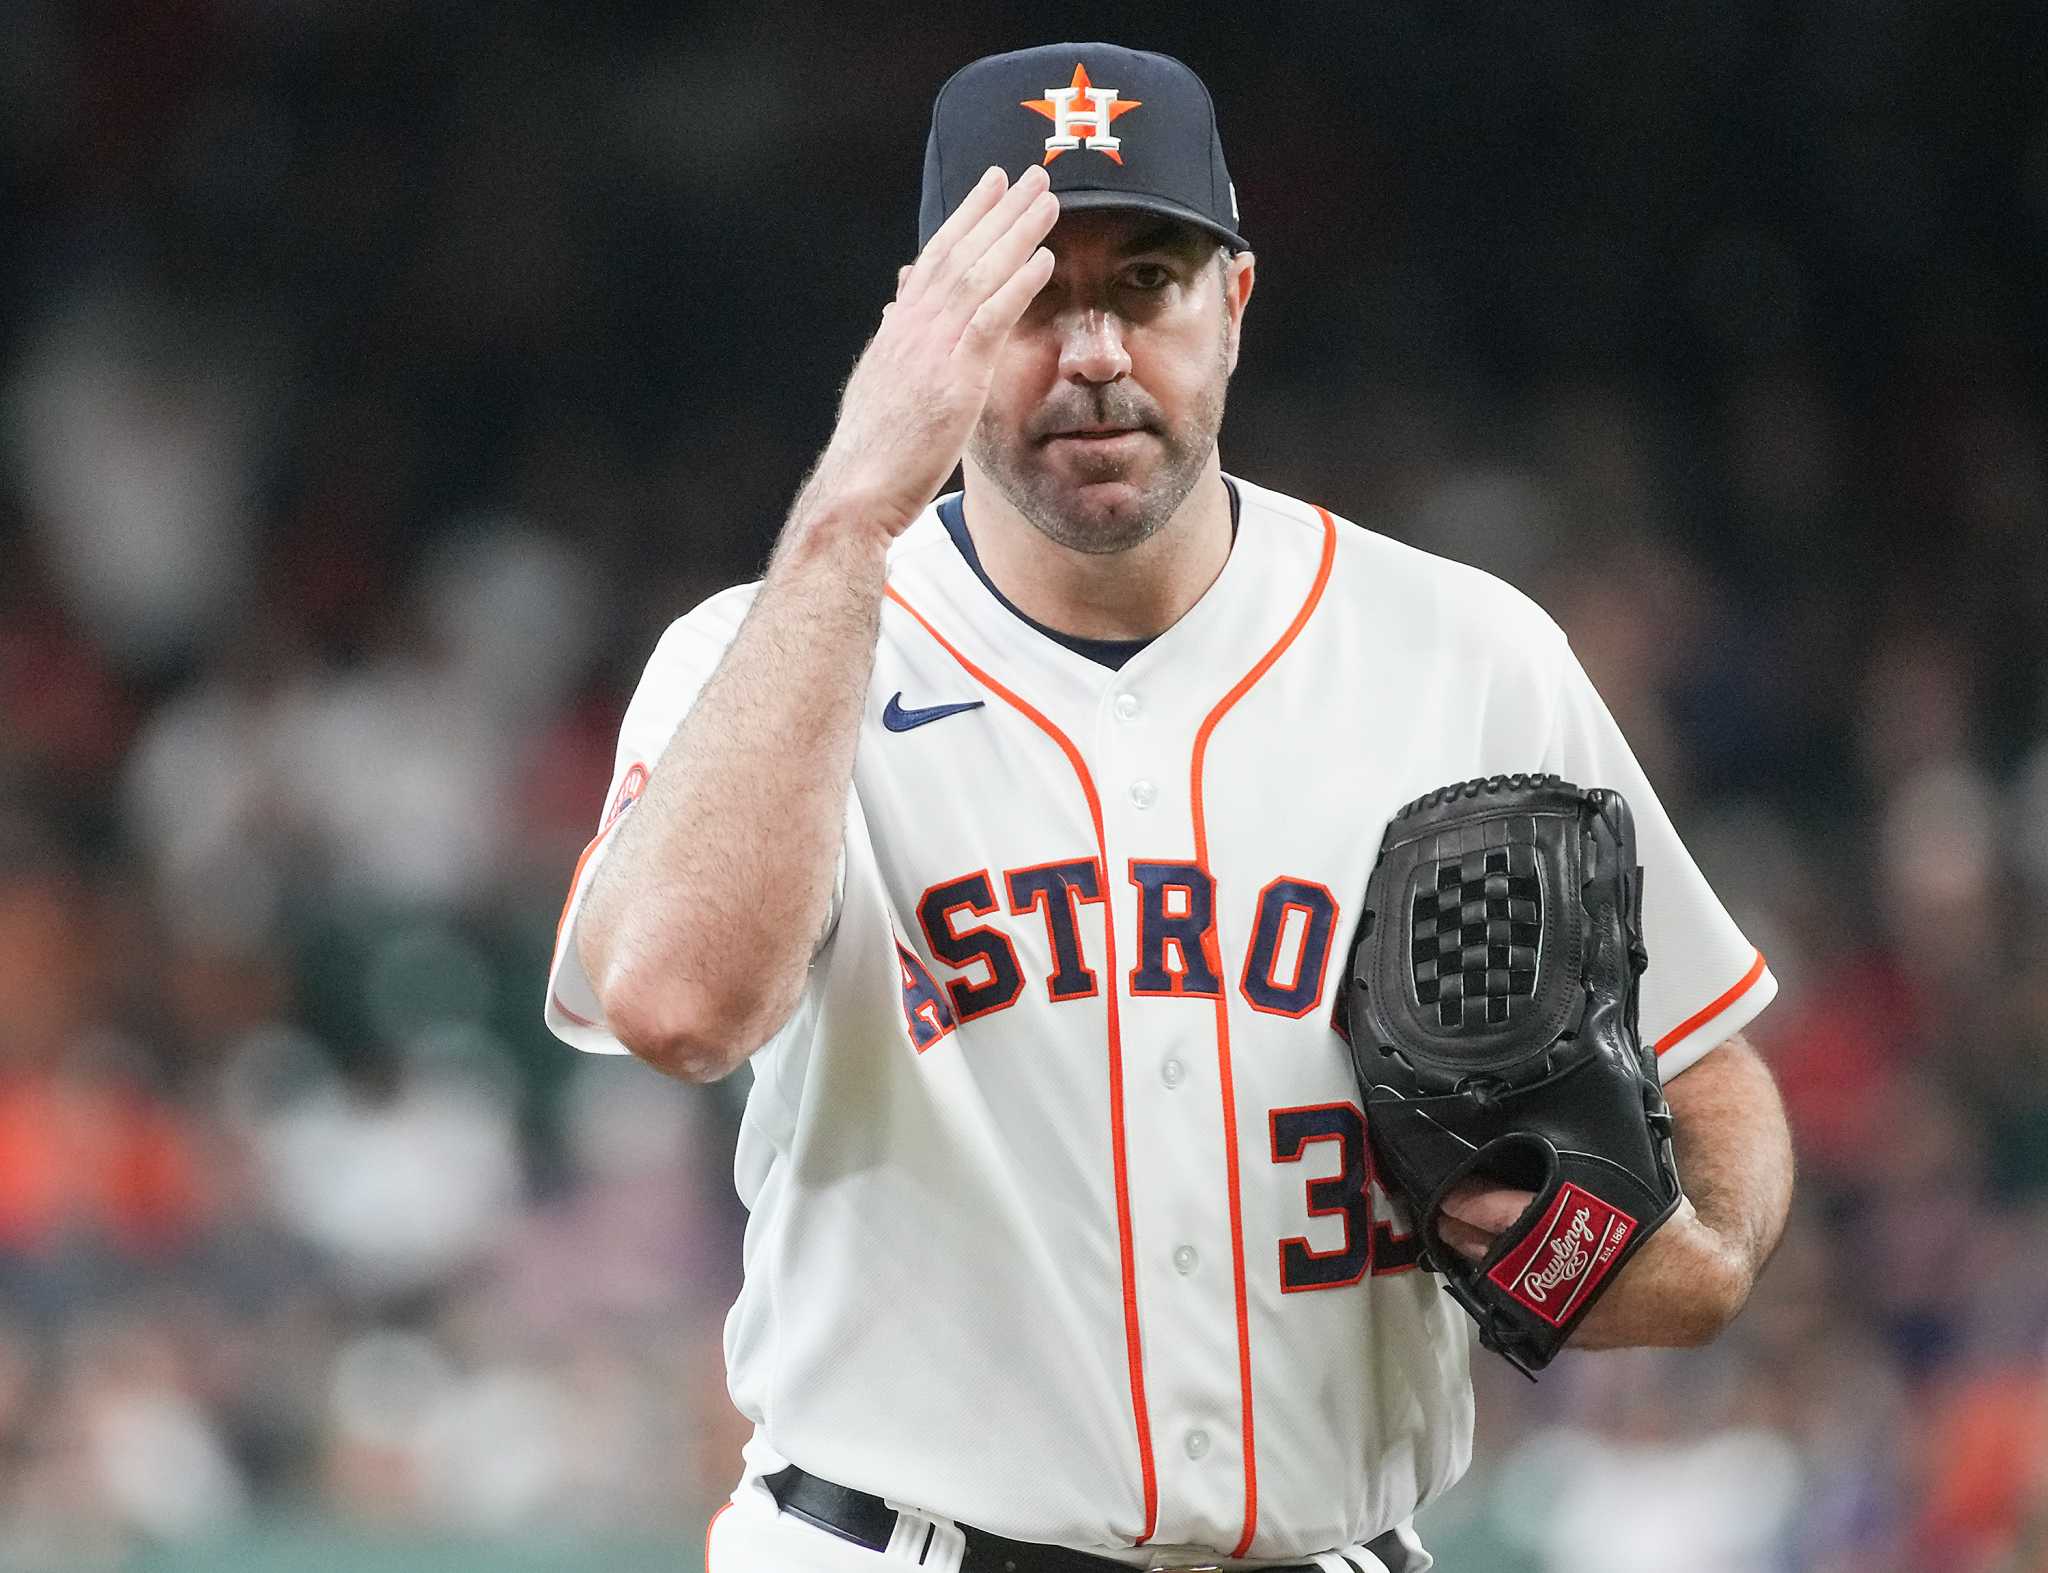 Astros' Cristian Javier says pitch clock countdown from Twins